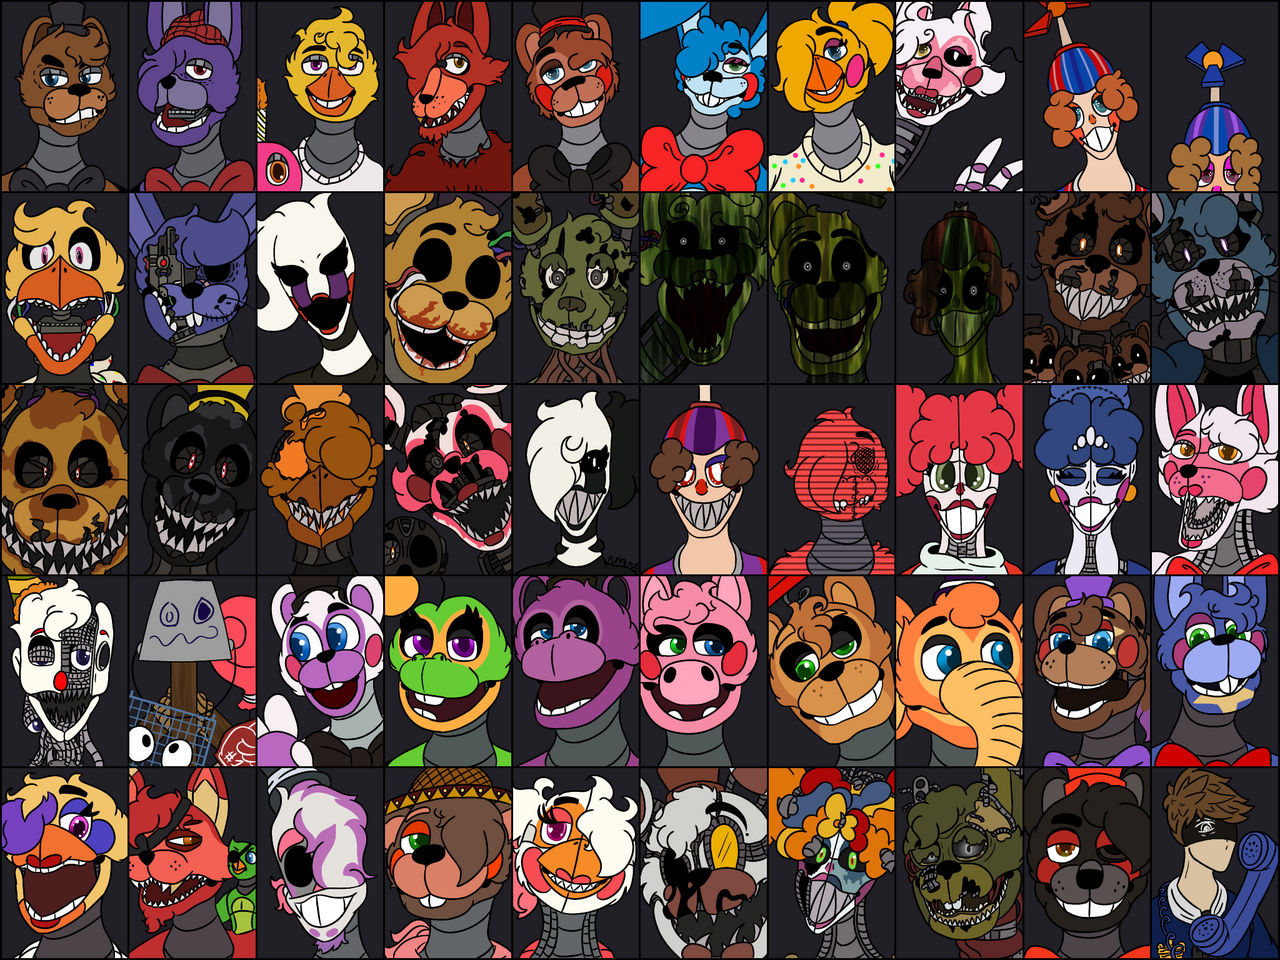 Ultimate Custom Night is turning 5! To celebrate it's anniversary, here's  my latest yearly redraw of it's huge roster! Happy birthday UCN! :  r/fivenightsatfreddys